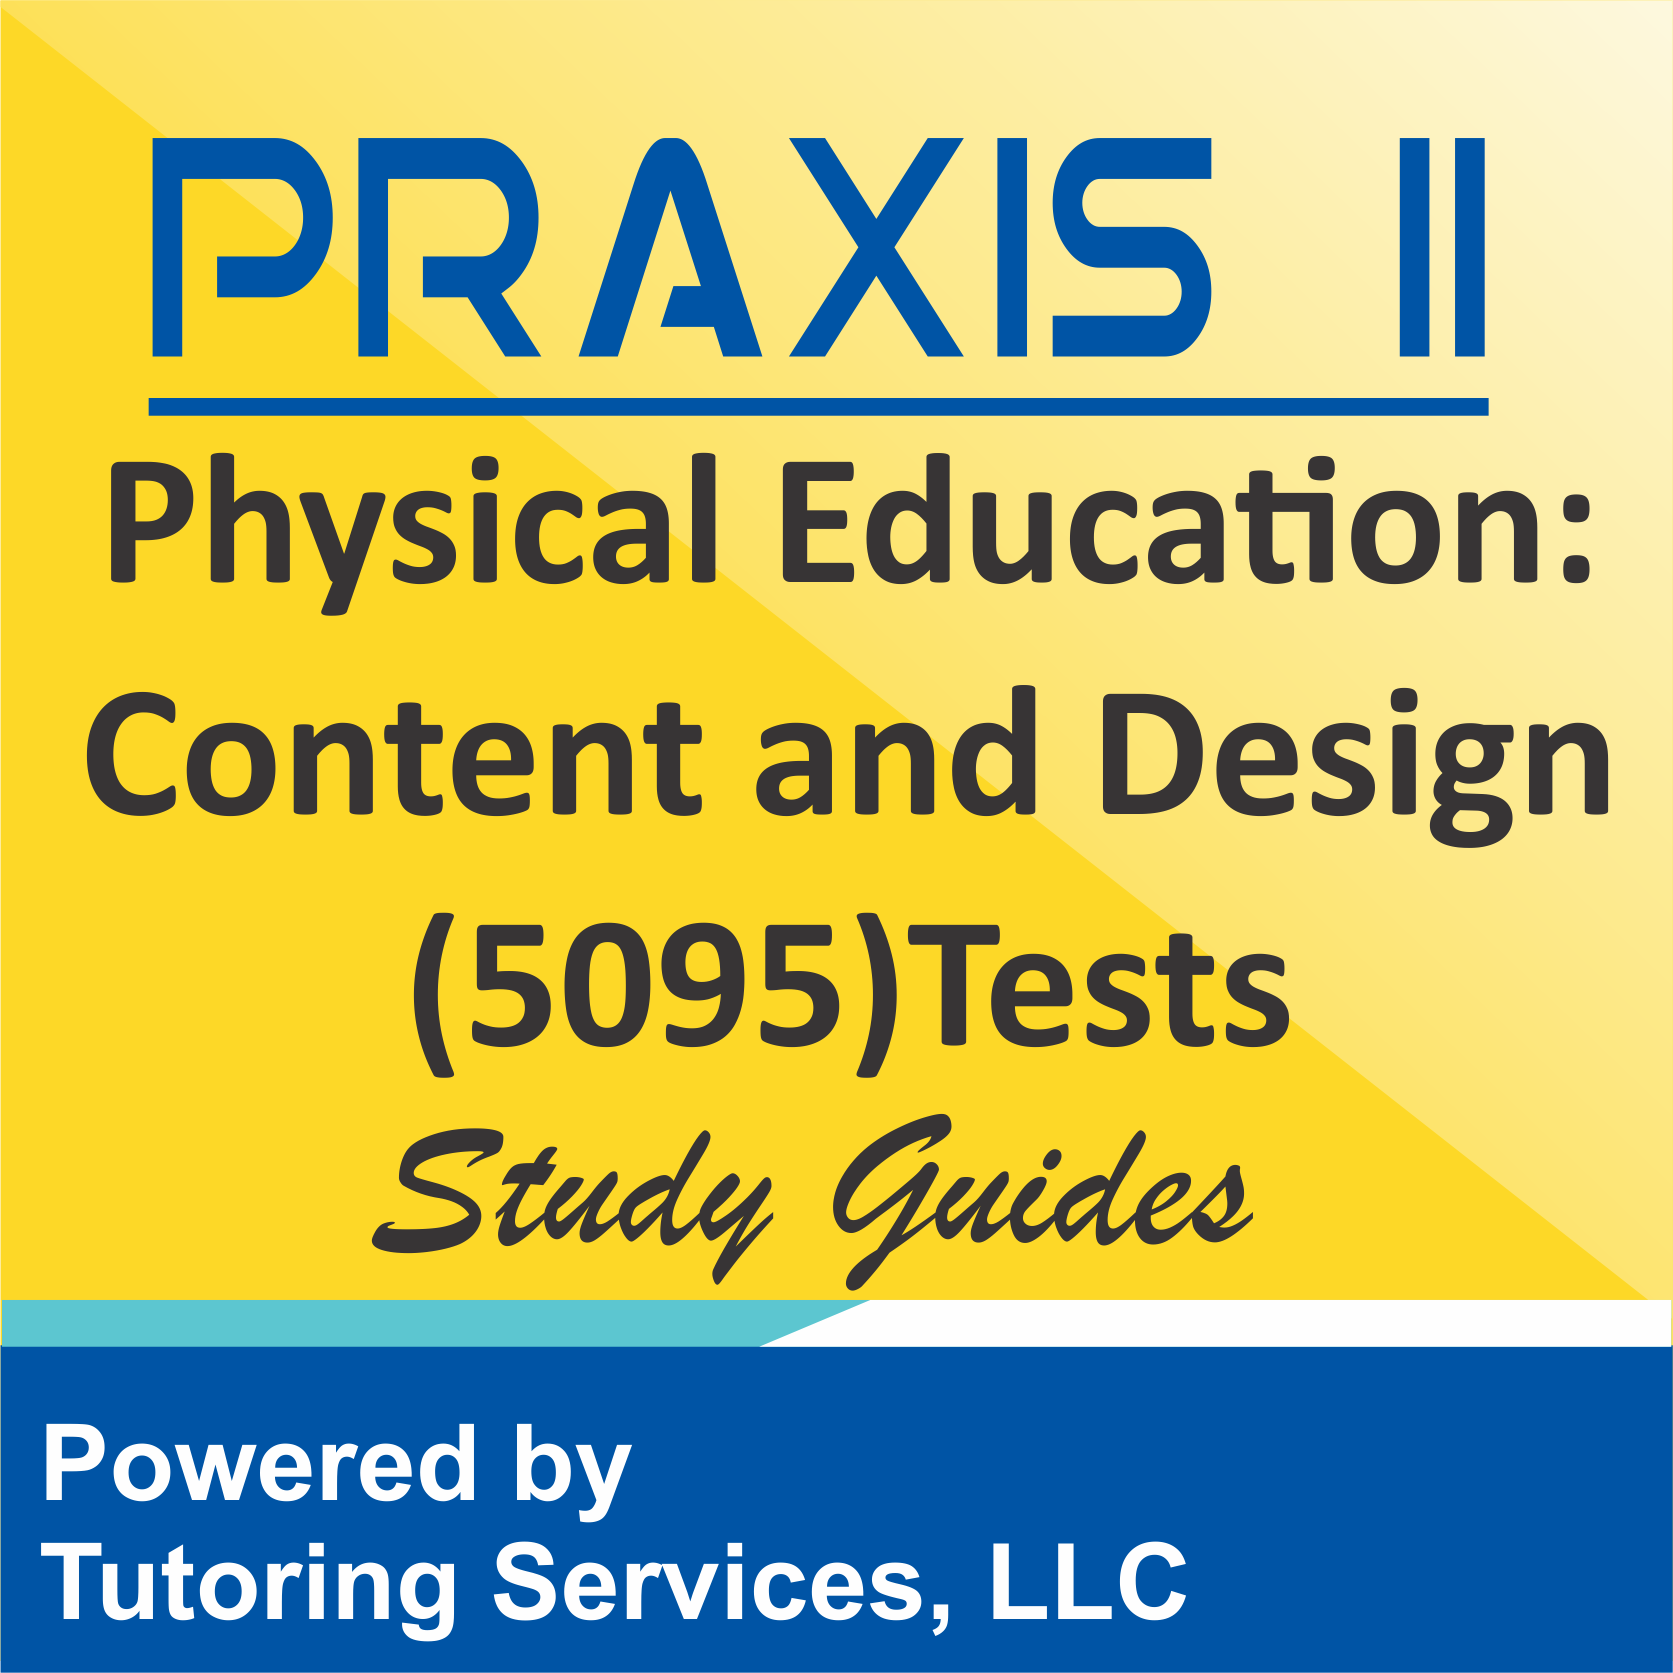 Praxis II Physical Education: Content and Design (5095) Subject Test Syllabus